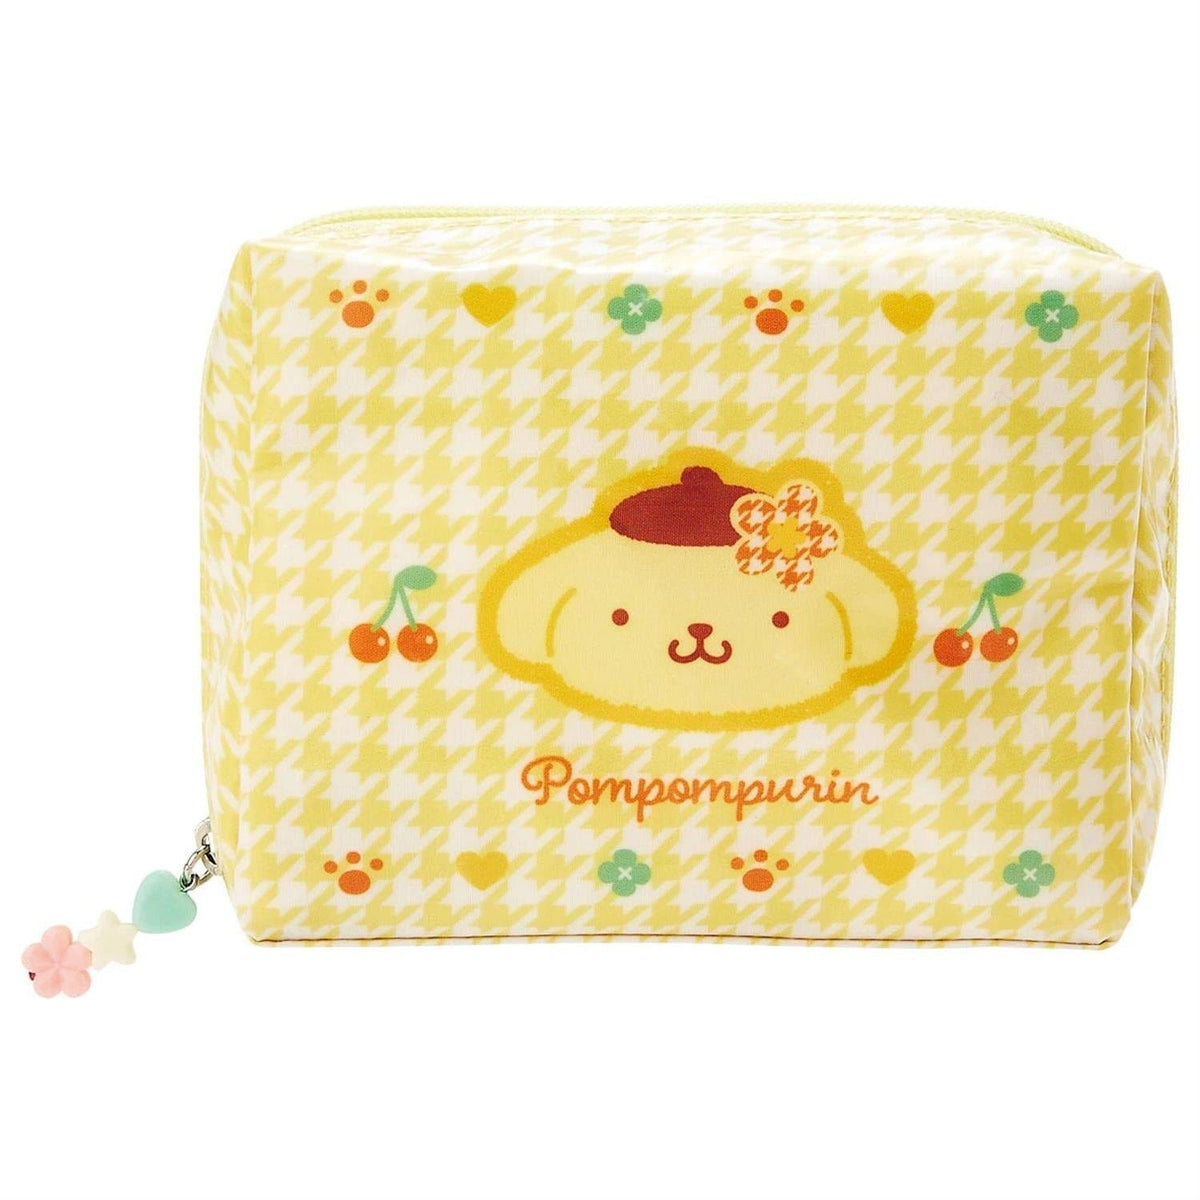 Pompompurin Houndstooth Pouch (Kaohana Collection)